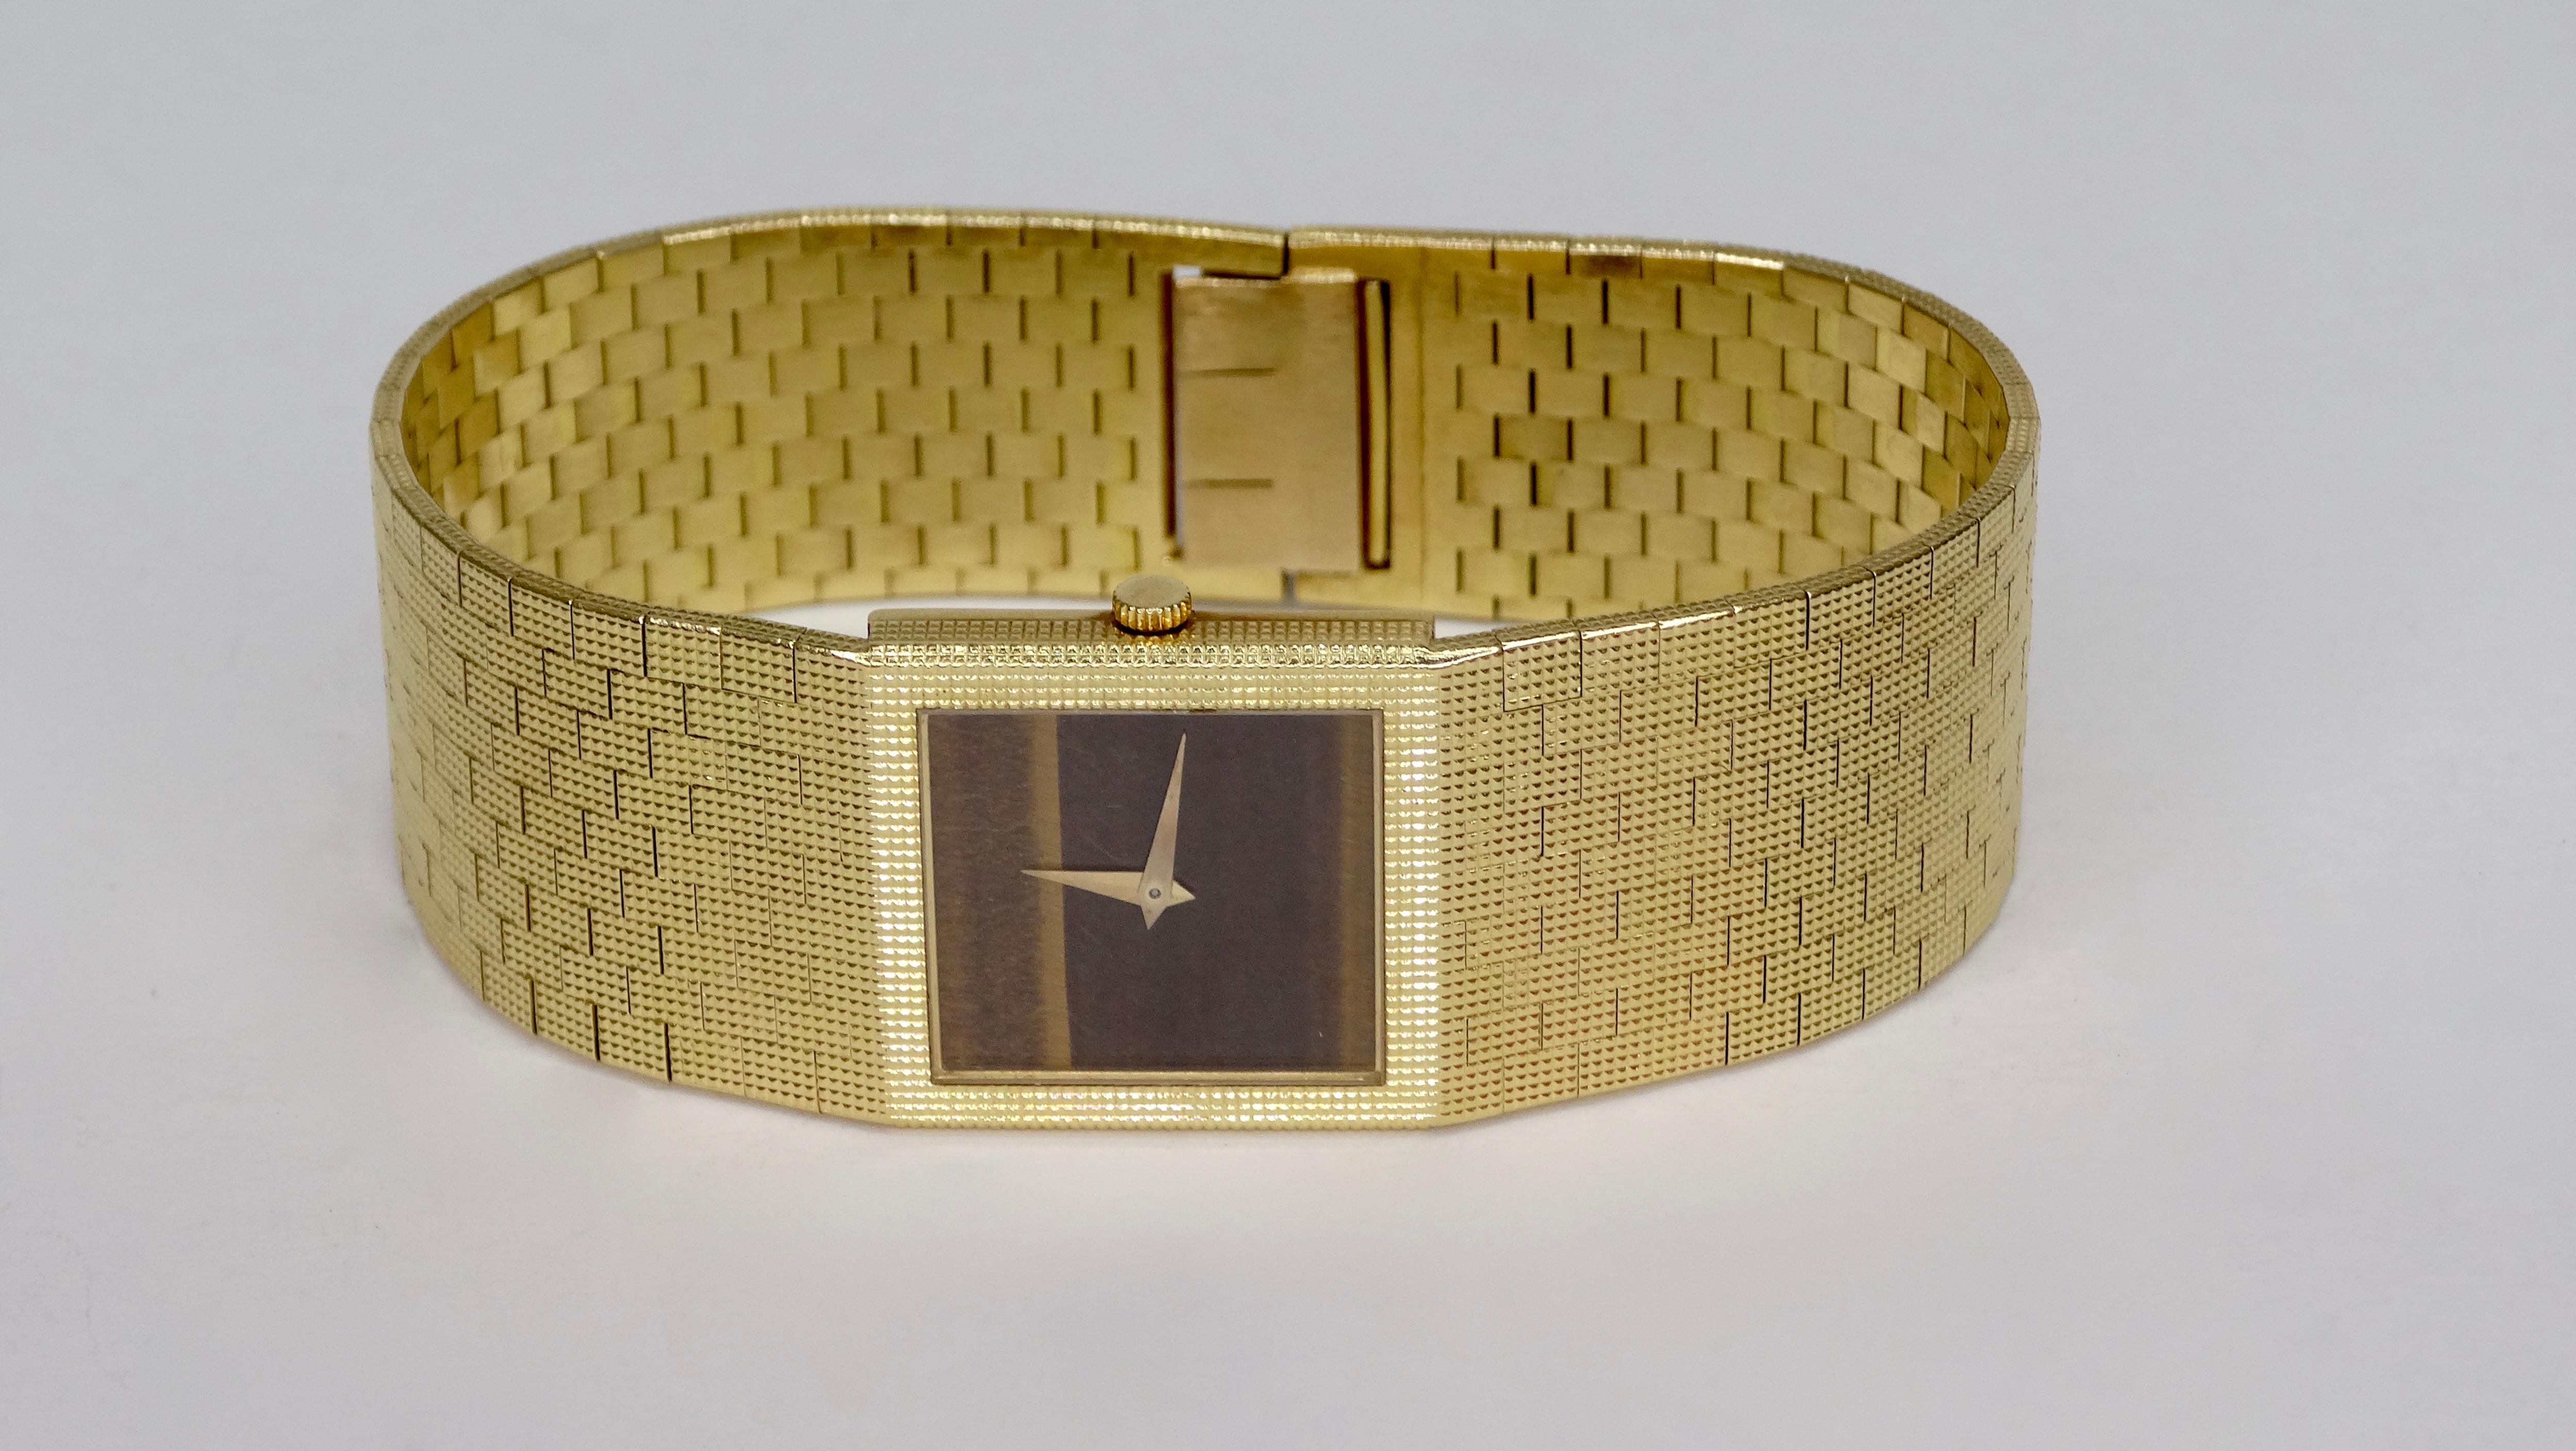 Gorgeous 1980s Swiss made Piaget watch solid 18k Yellow Gold. Features a sophisticated and flexible mesh gold bracelet, quartz movement, a Tigers Eye face. A classic time piece! 97.2g. 7.5 inches long, 1 inch wide. Style with all you favorites